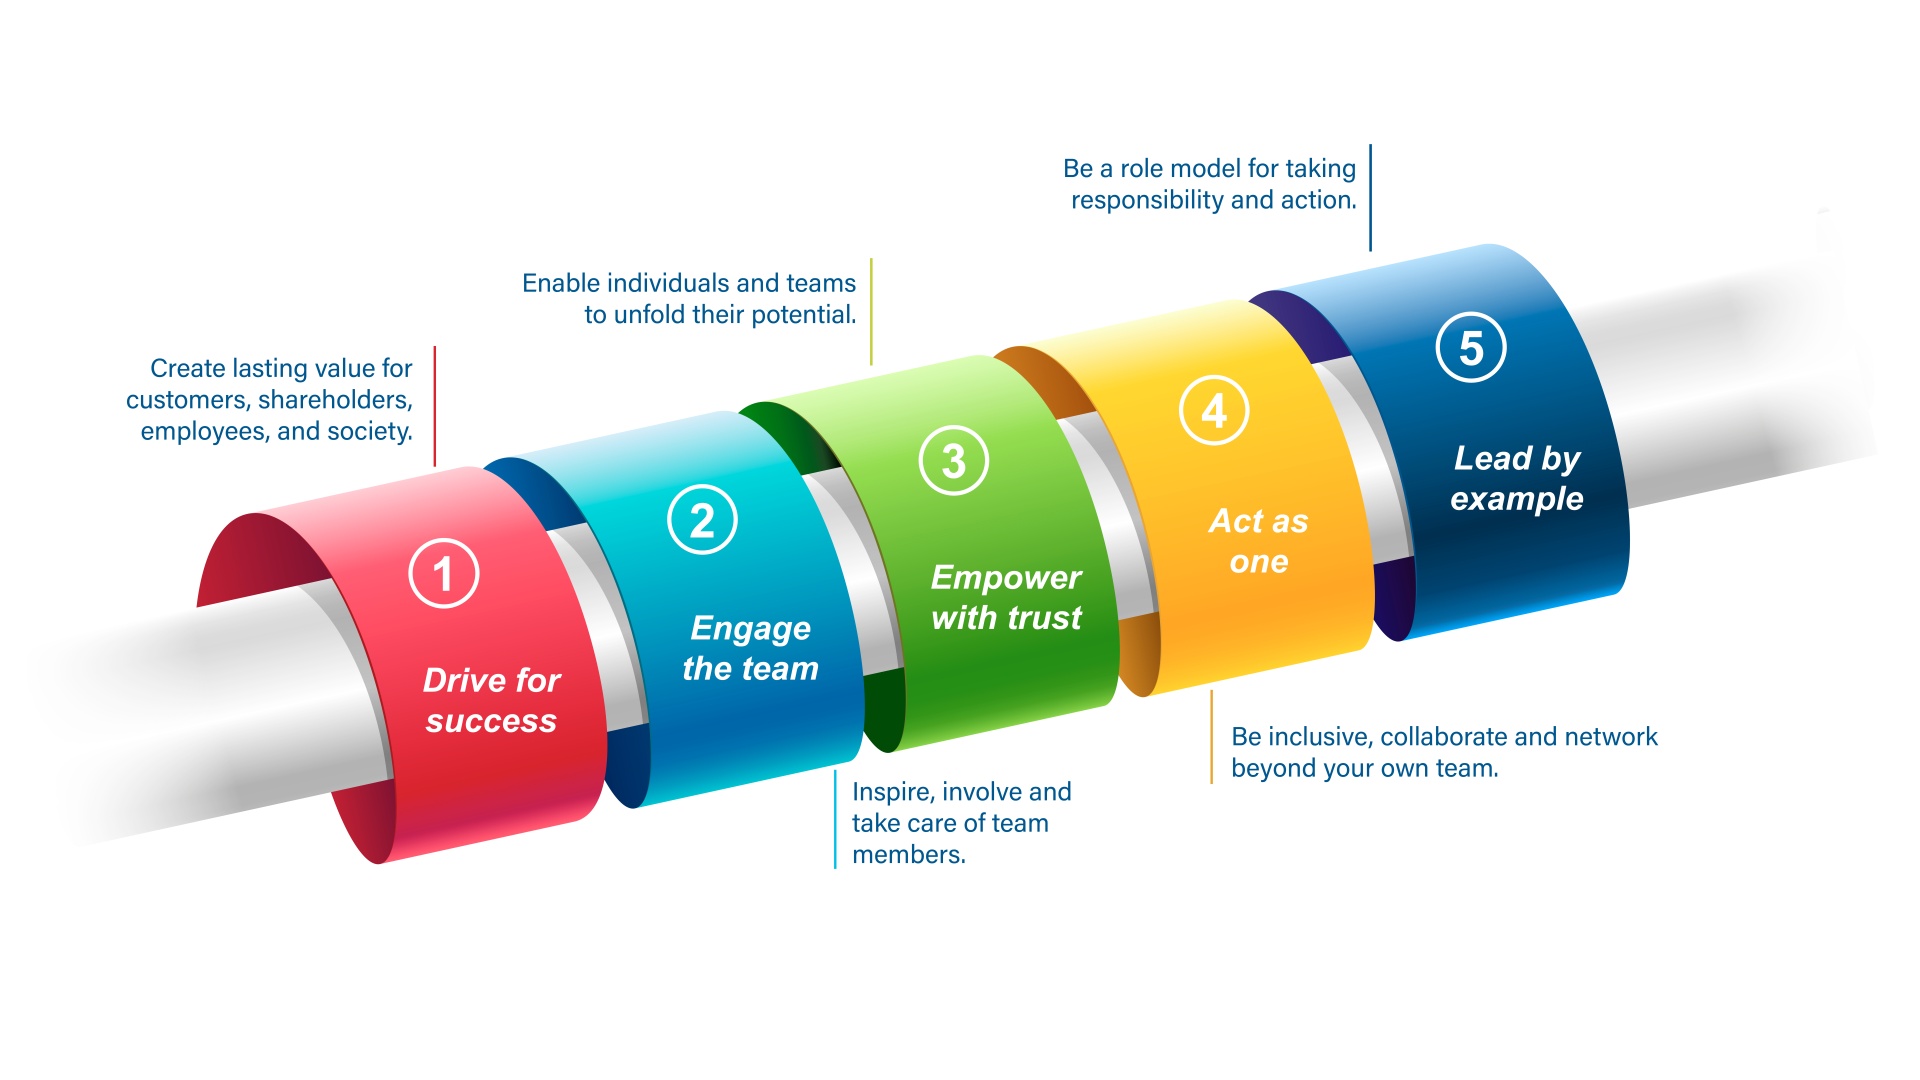 A graphic is shown on which the five Knorr-Bremse Leadership principles are named and described.